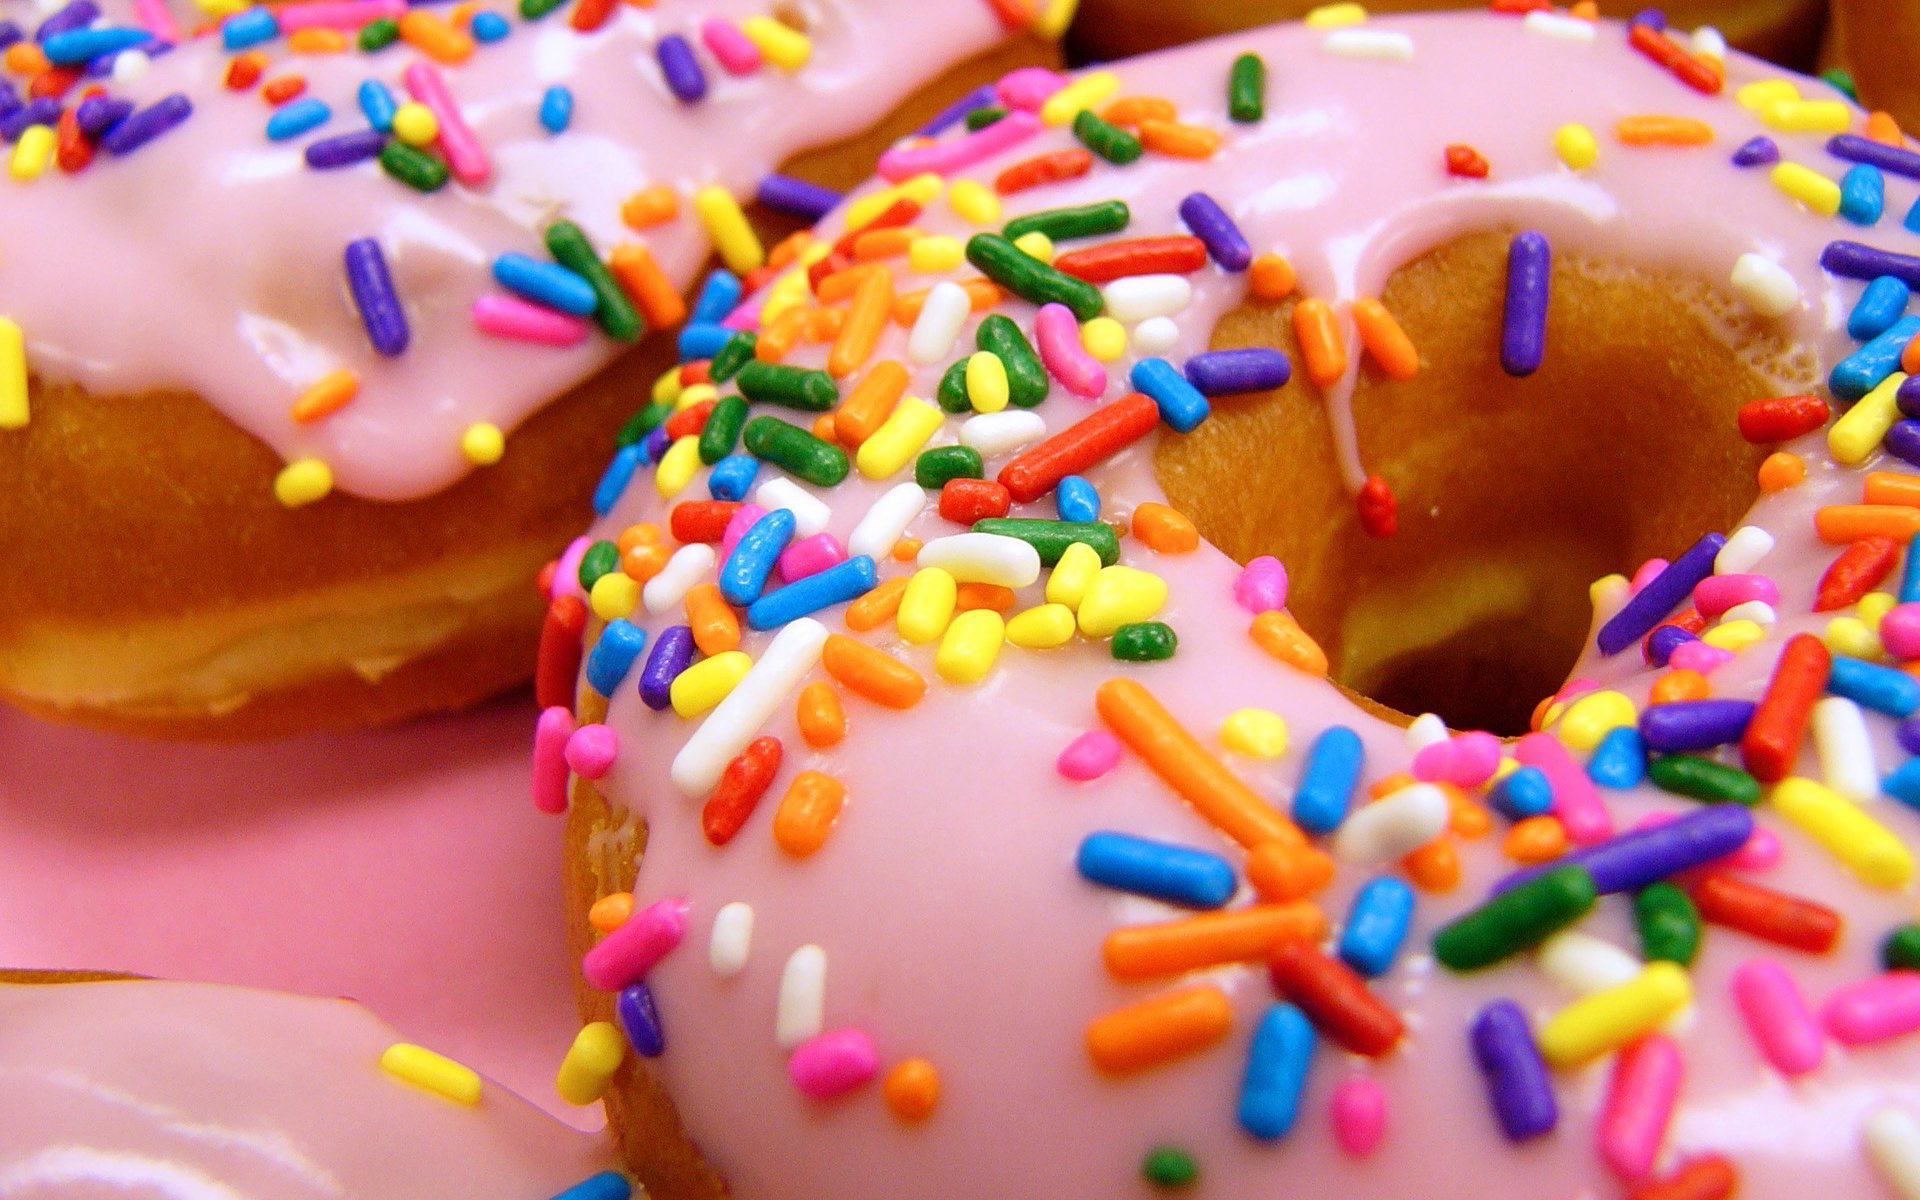 Pink Donuts - Donut Close Up - 1920x1200 Wallpaper 